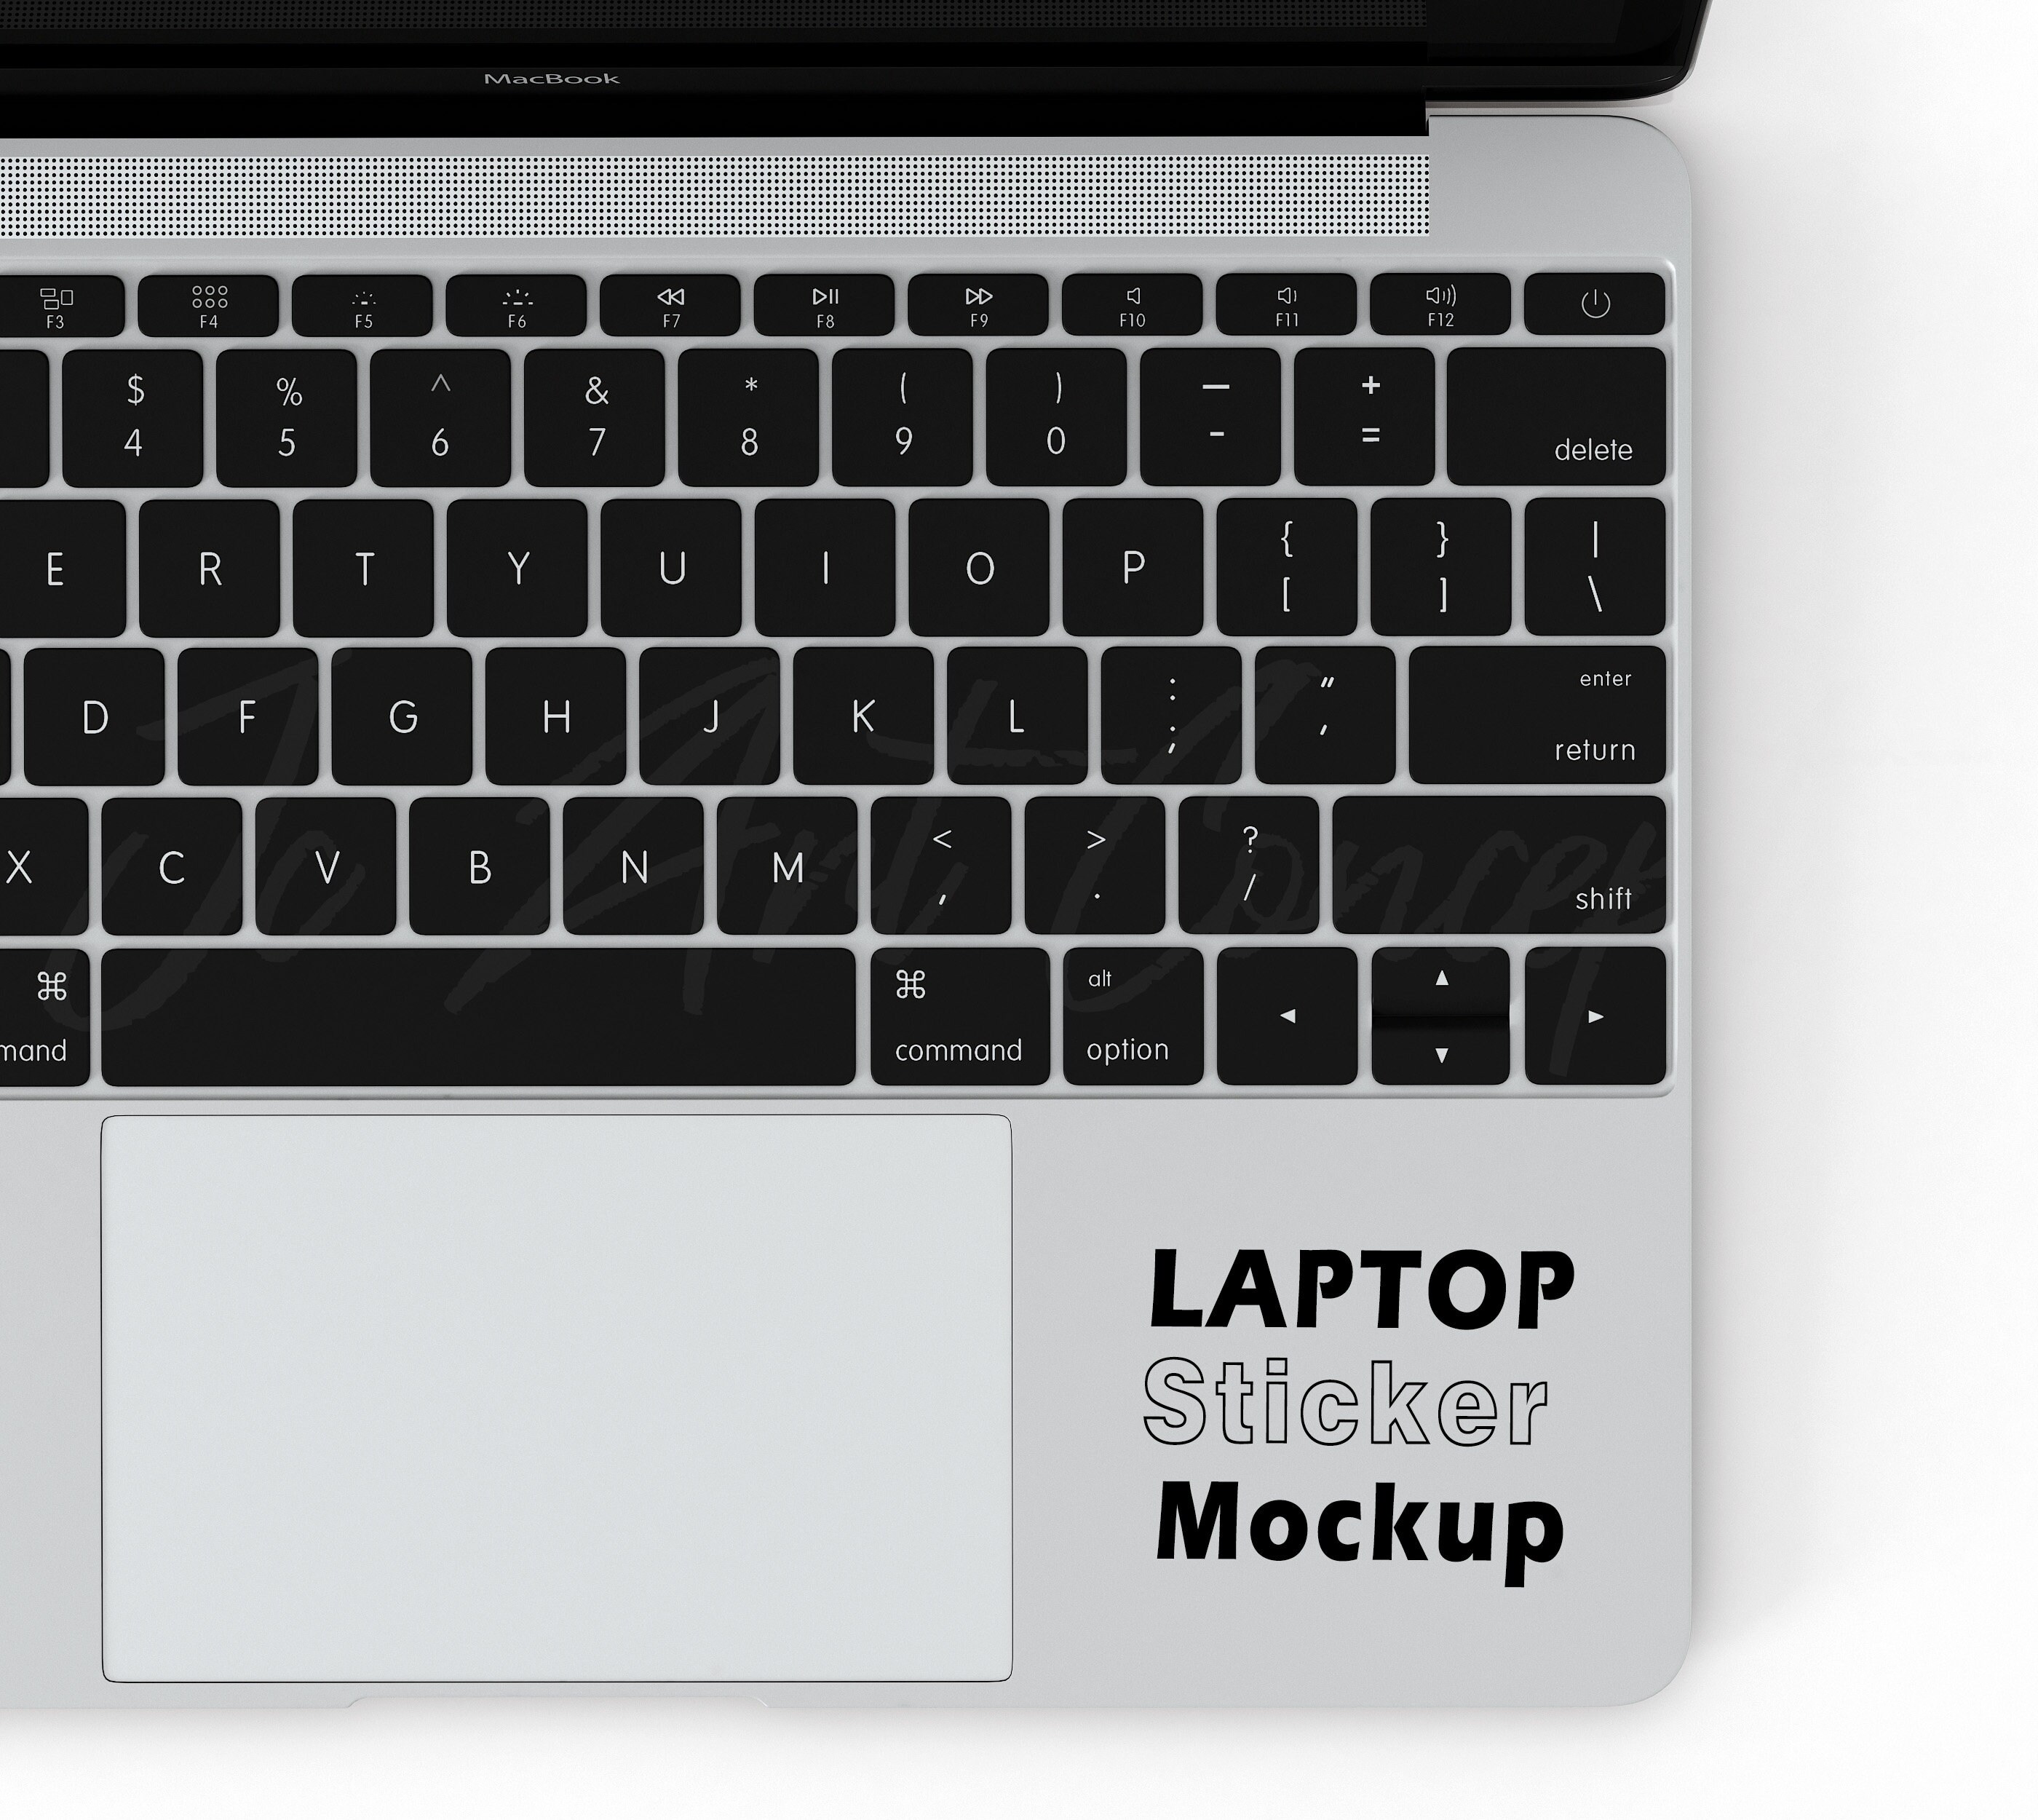 Laptop Sticker Mockup  1 PSD with 5 JPG images (1102741)